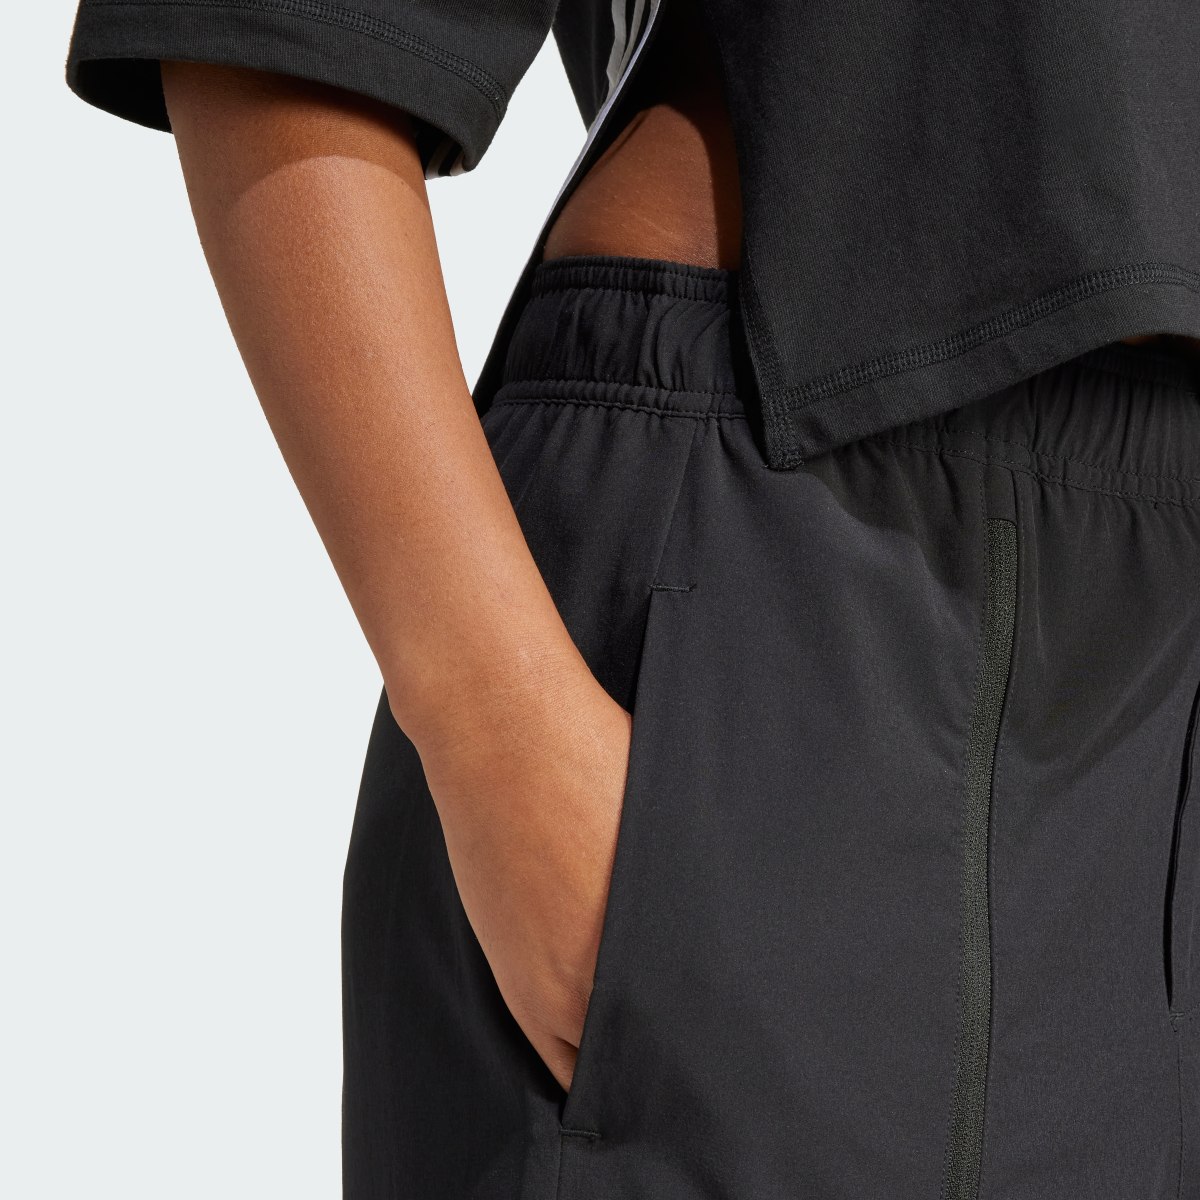 Adidas Express All-Gender Cargo Tracksuit Bottoms. 6